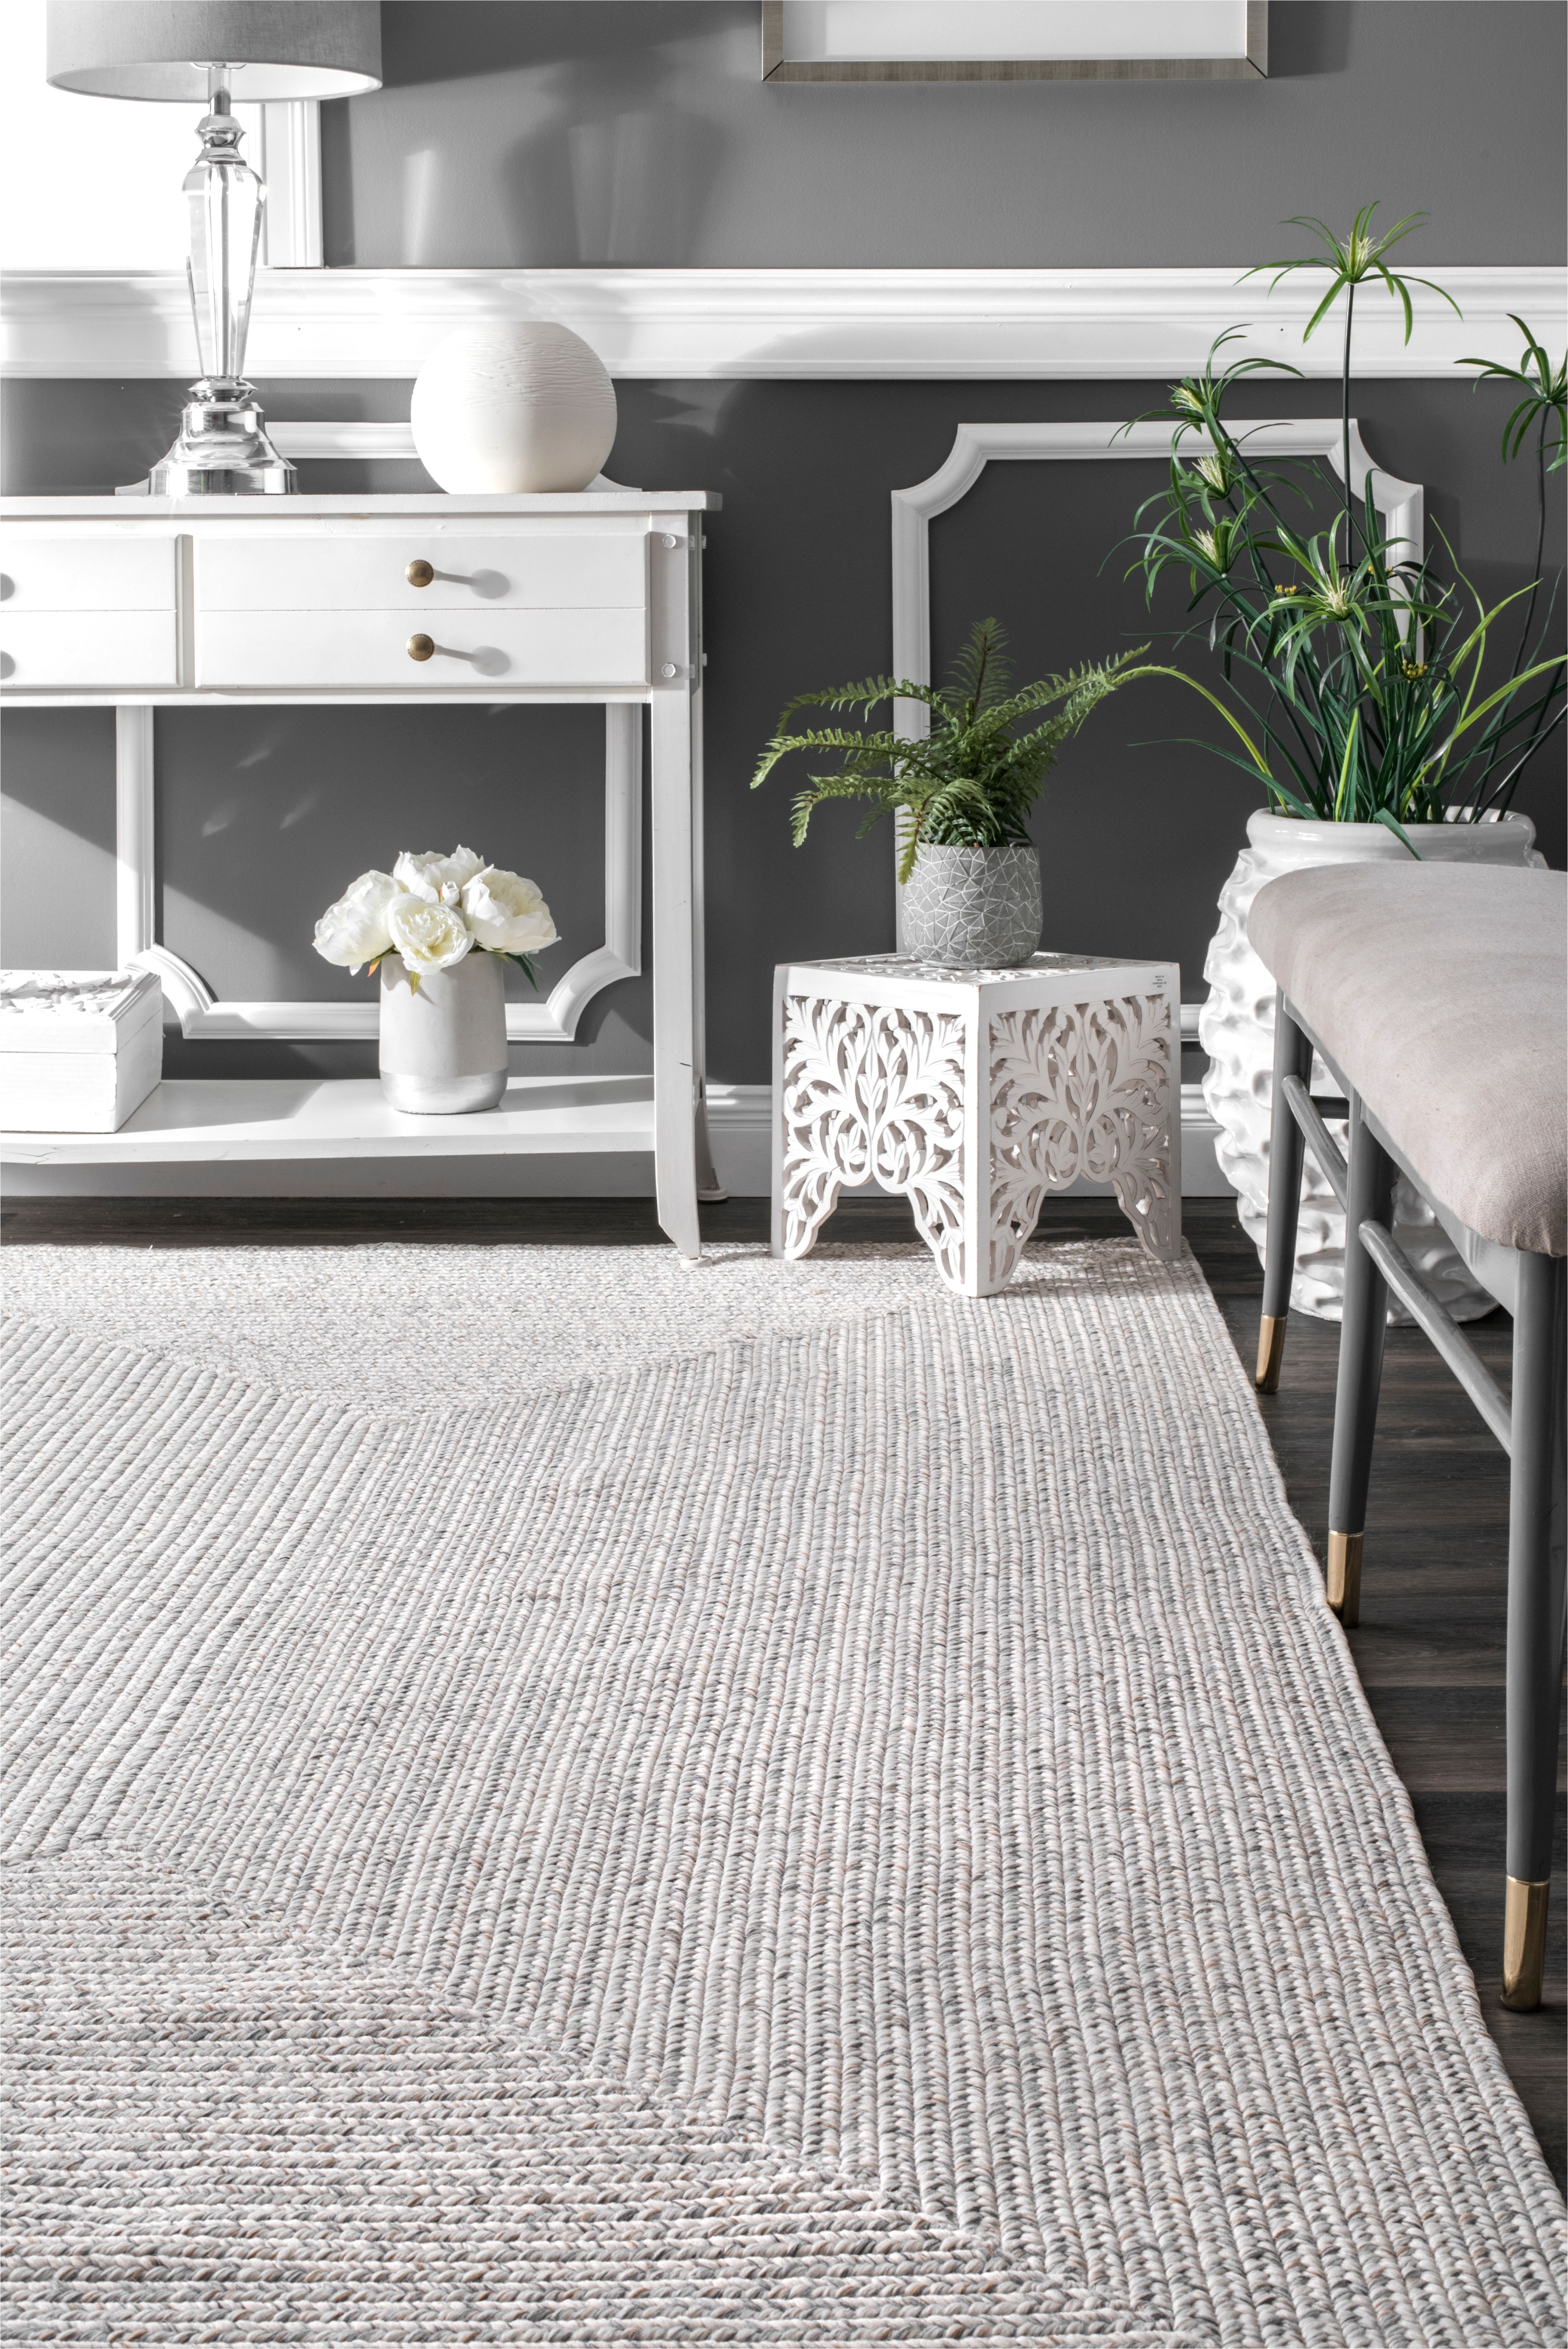 bring this contemporary and braided rug to give an elegant and chic look to your home made of 100 percent polypropylene fiber the rug is thin and easy to